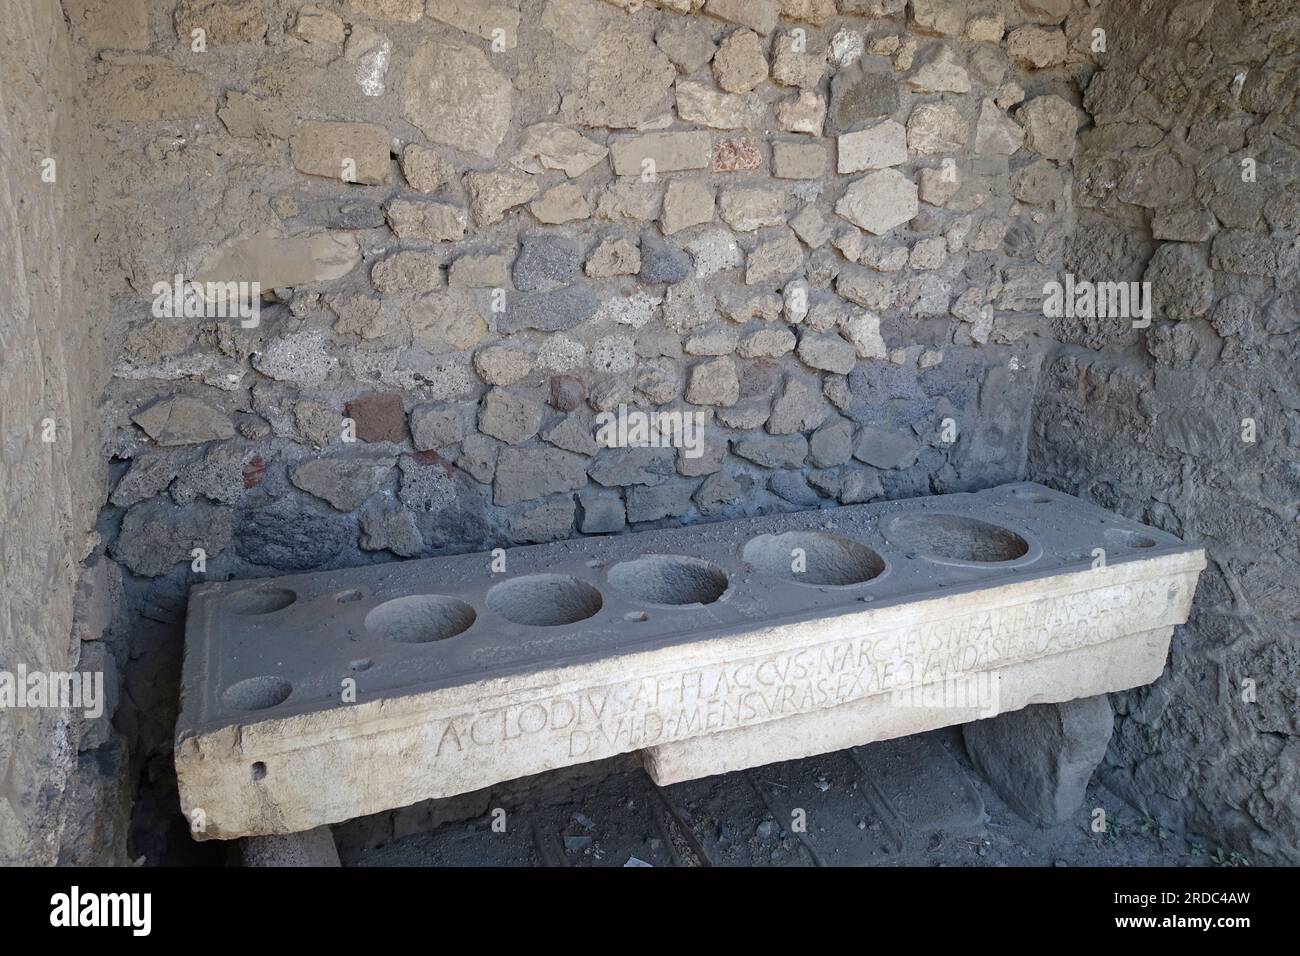 Pompey, Italy, ruins after excavation under ash after volcanic eruption in 79AD. Grocers showing measuring pots shown here, Stock Photo